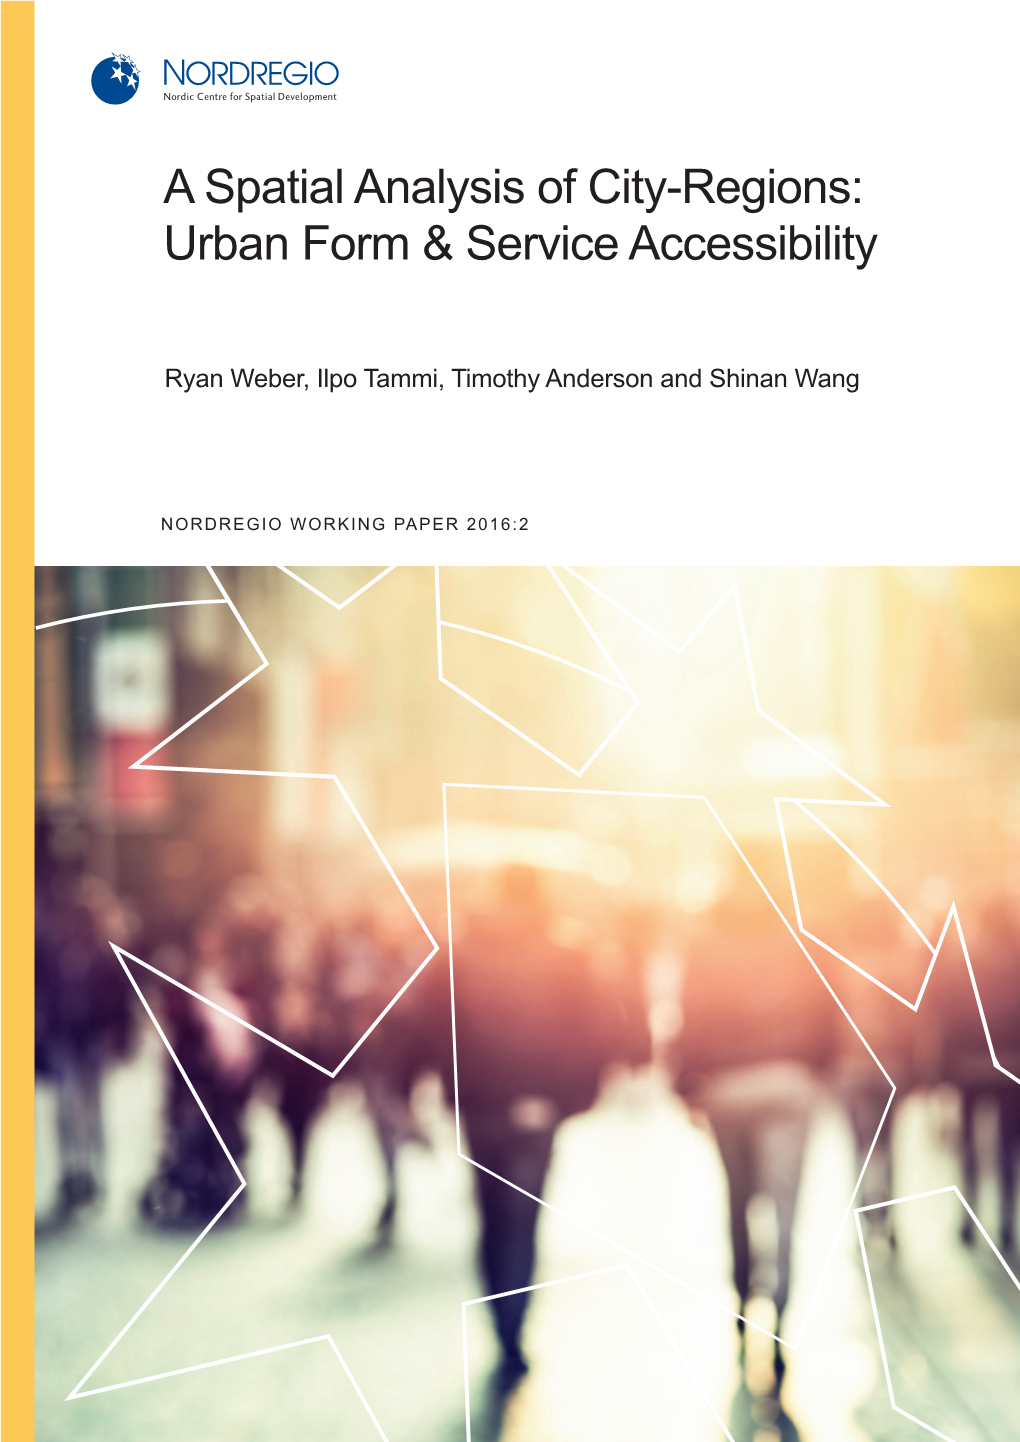 A Spatial Analysis of City-Regions: Urban Form & Service Accessibility